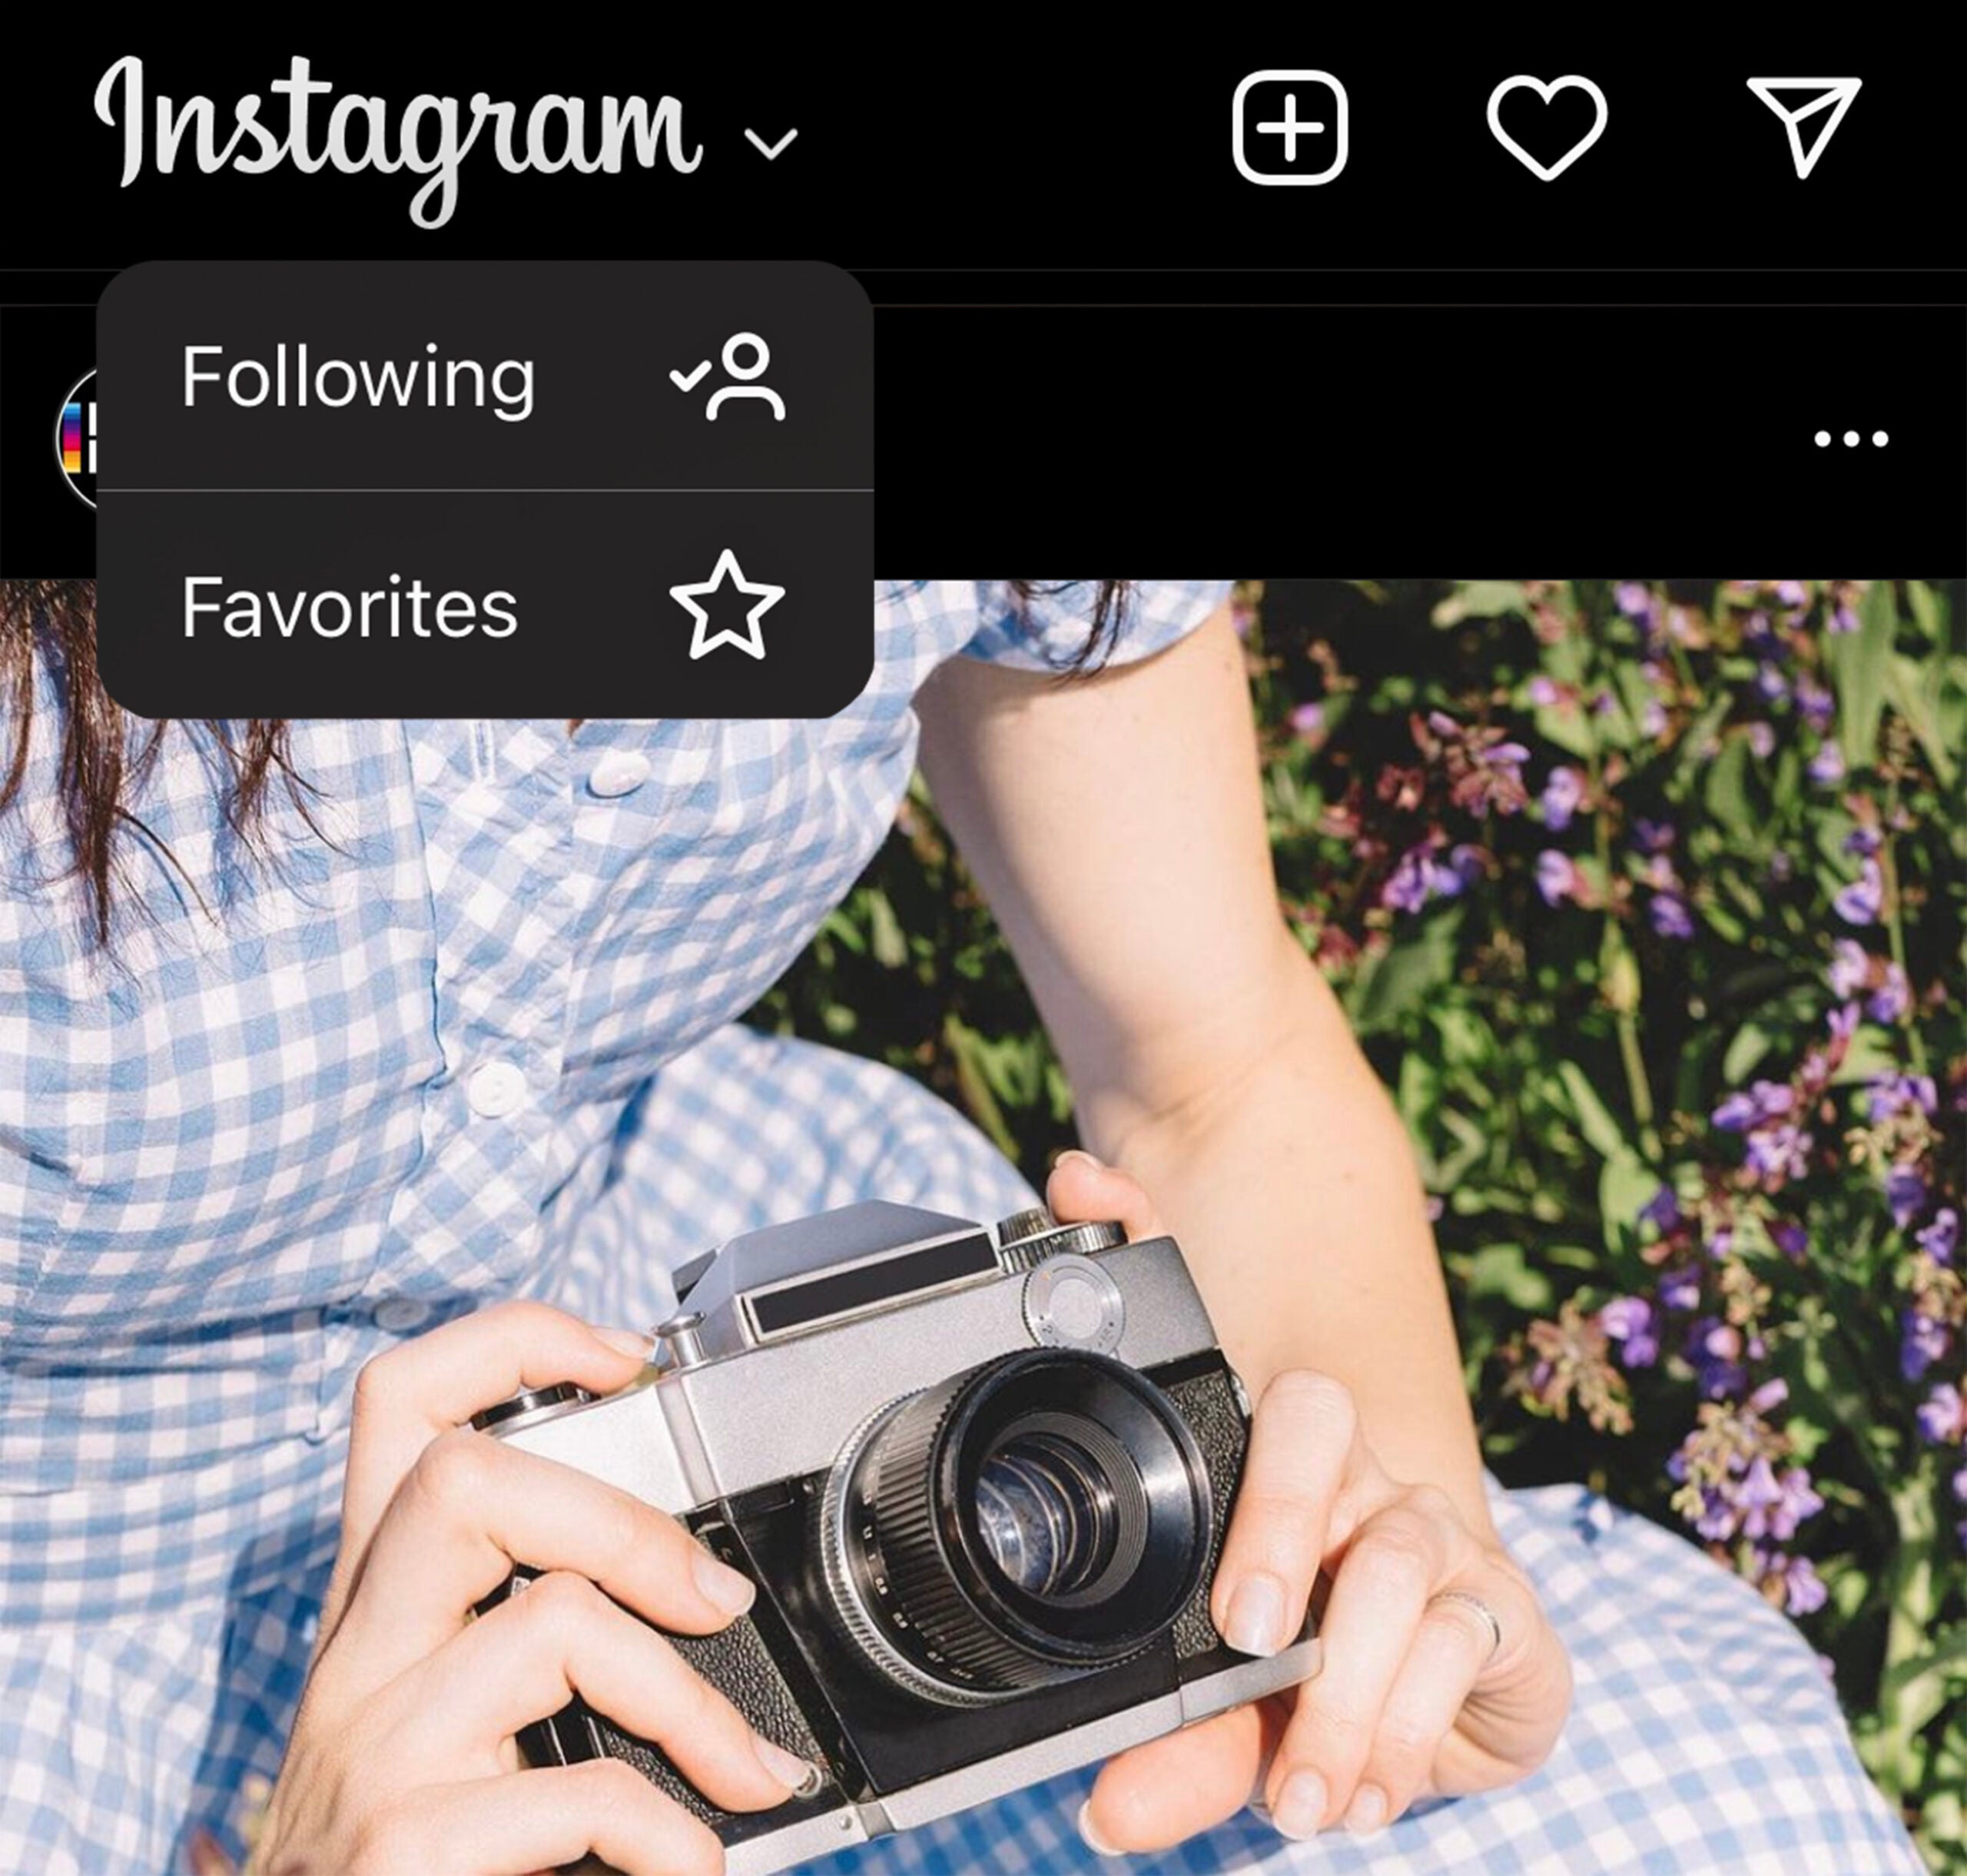 An Instagram screenshot showing new options to view a chronological feed.